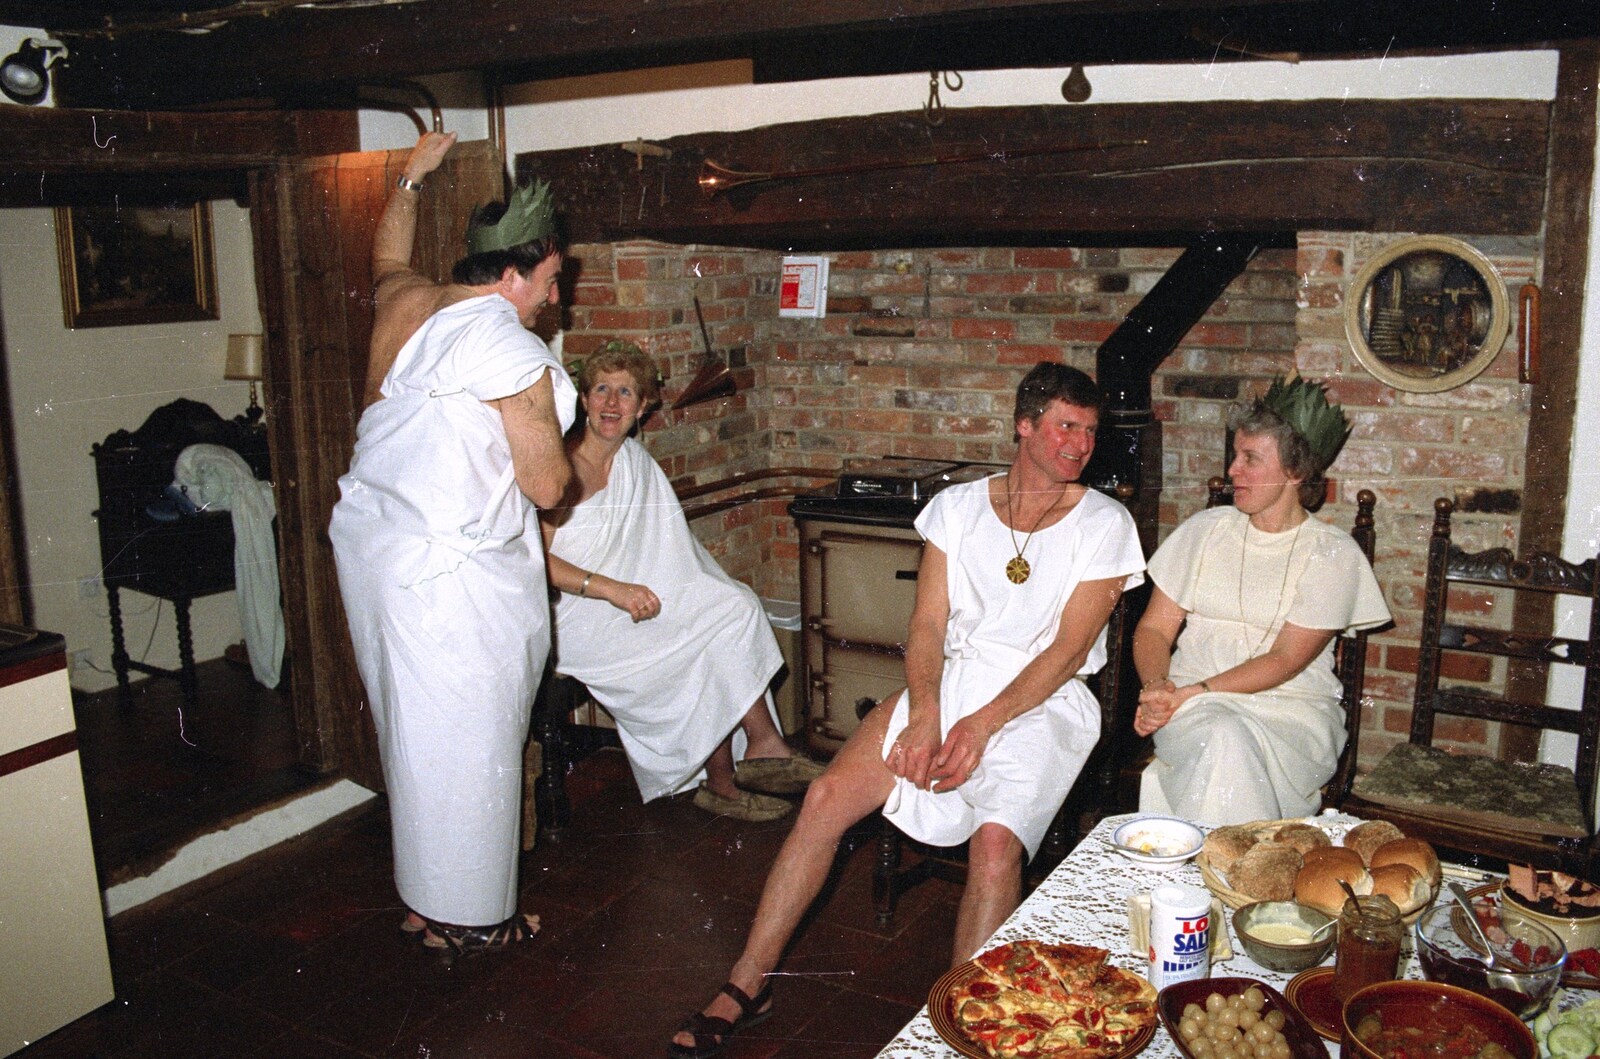 Geoff and Linda from Geoff and Brenda's Pre-Christmas Toga Party, Stuston, Suffolk - 17th December 1991